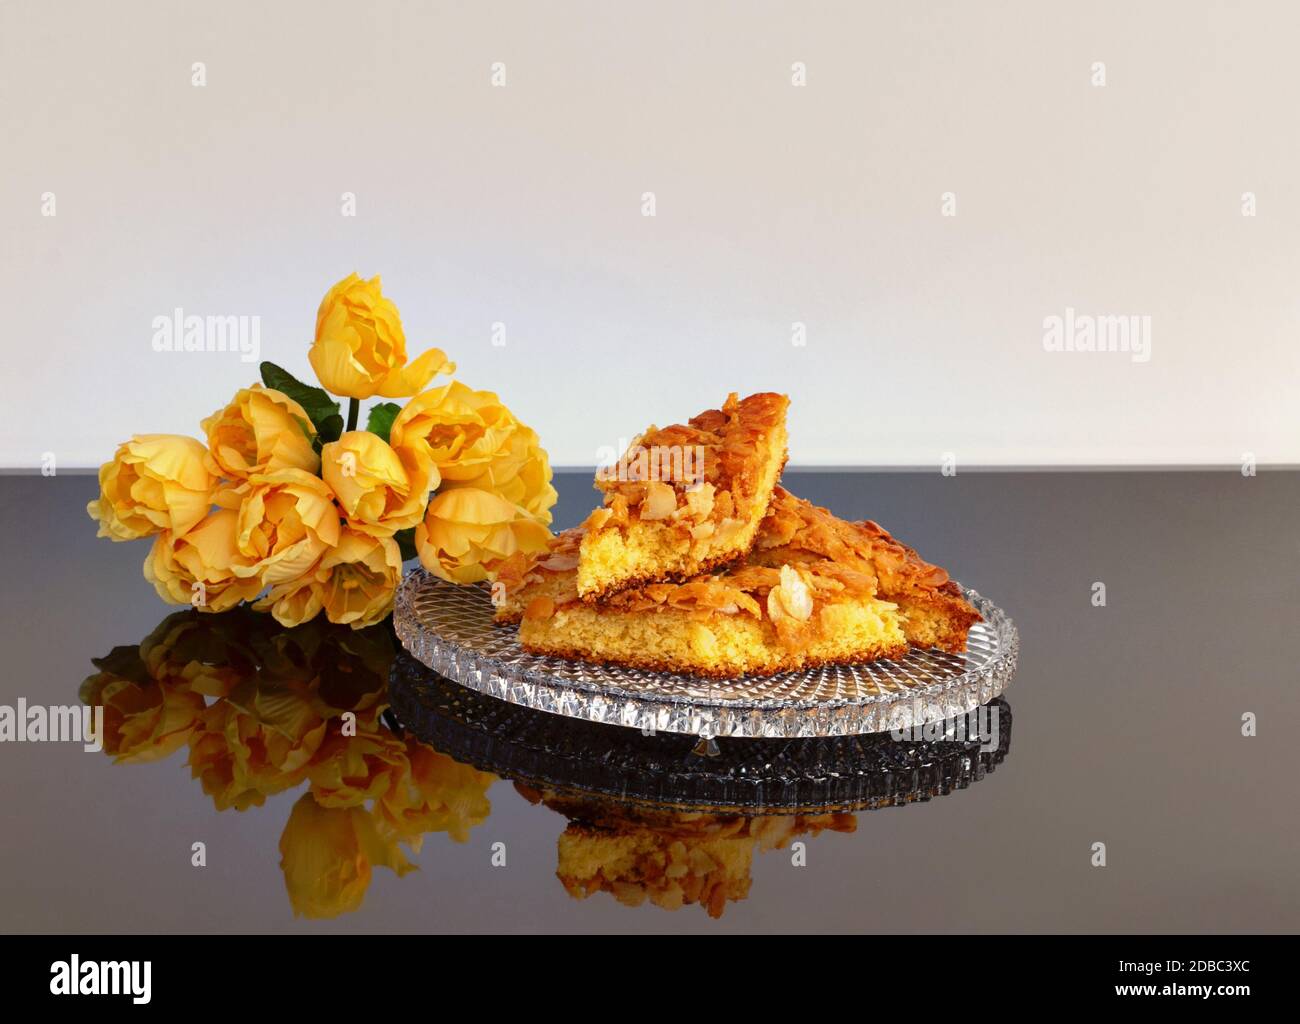 Homemade almond cake is reflected on a plate. Stock Photo